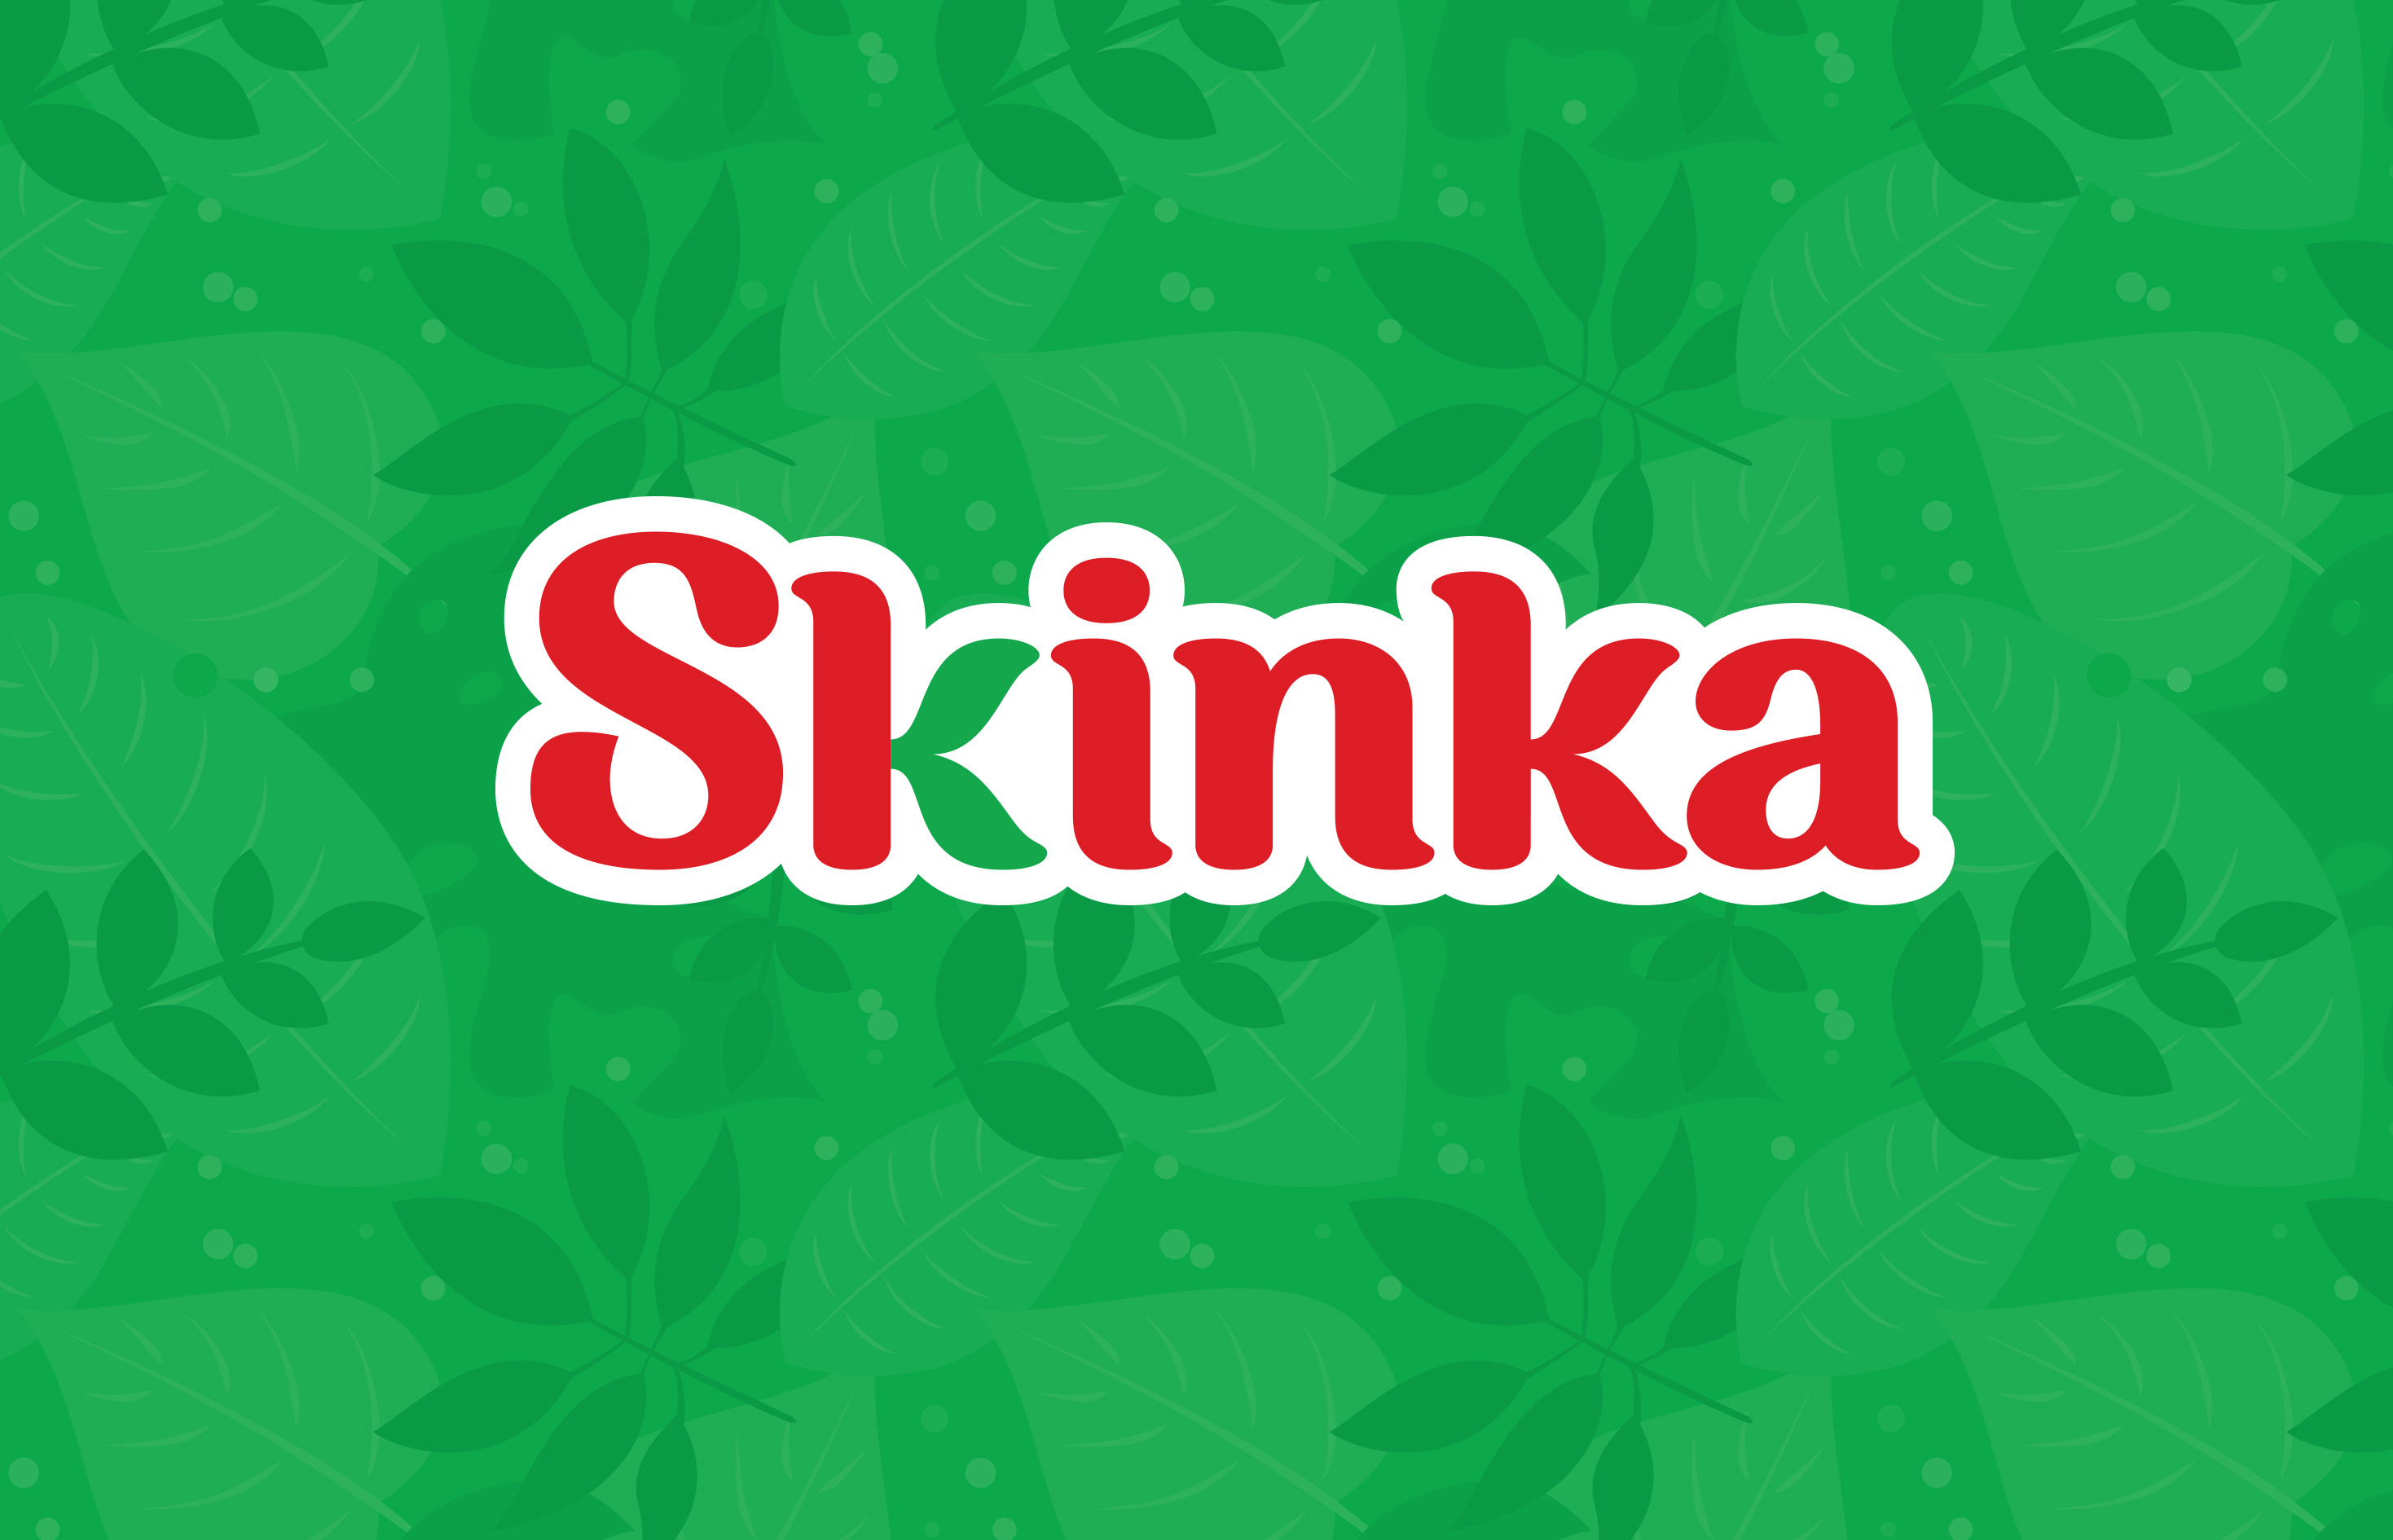 Skinka Rebranding Revamps Packaging and Puts Its Chips in New Look